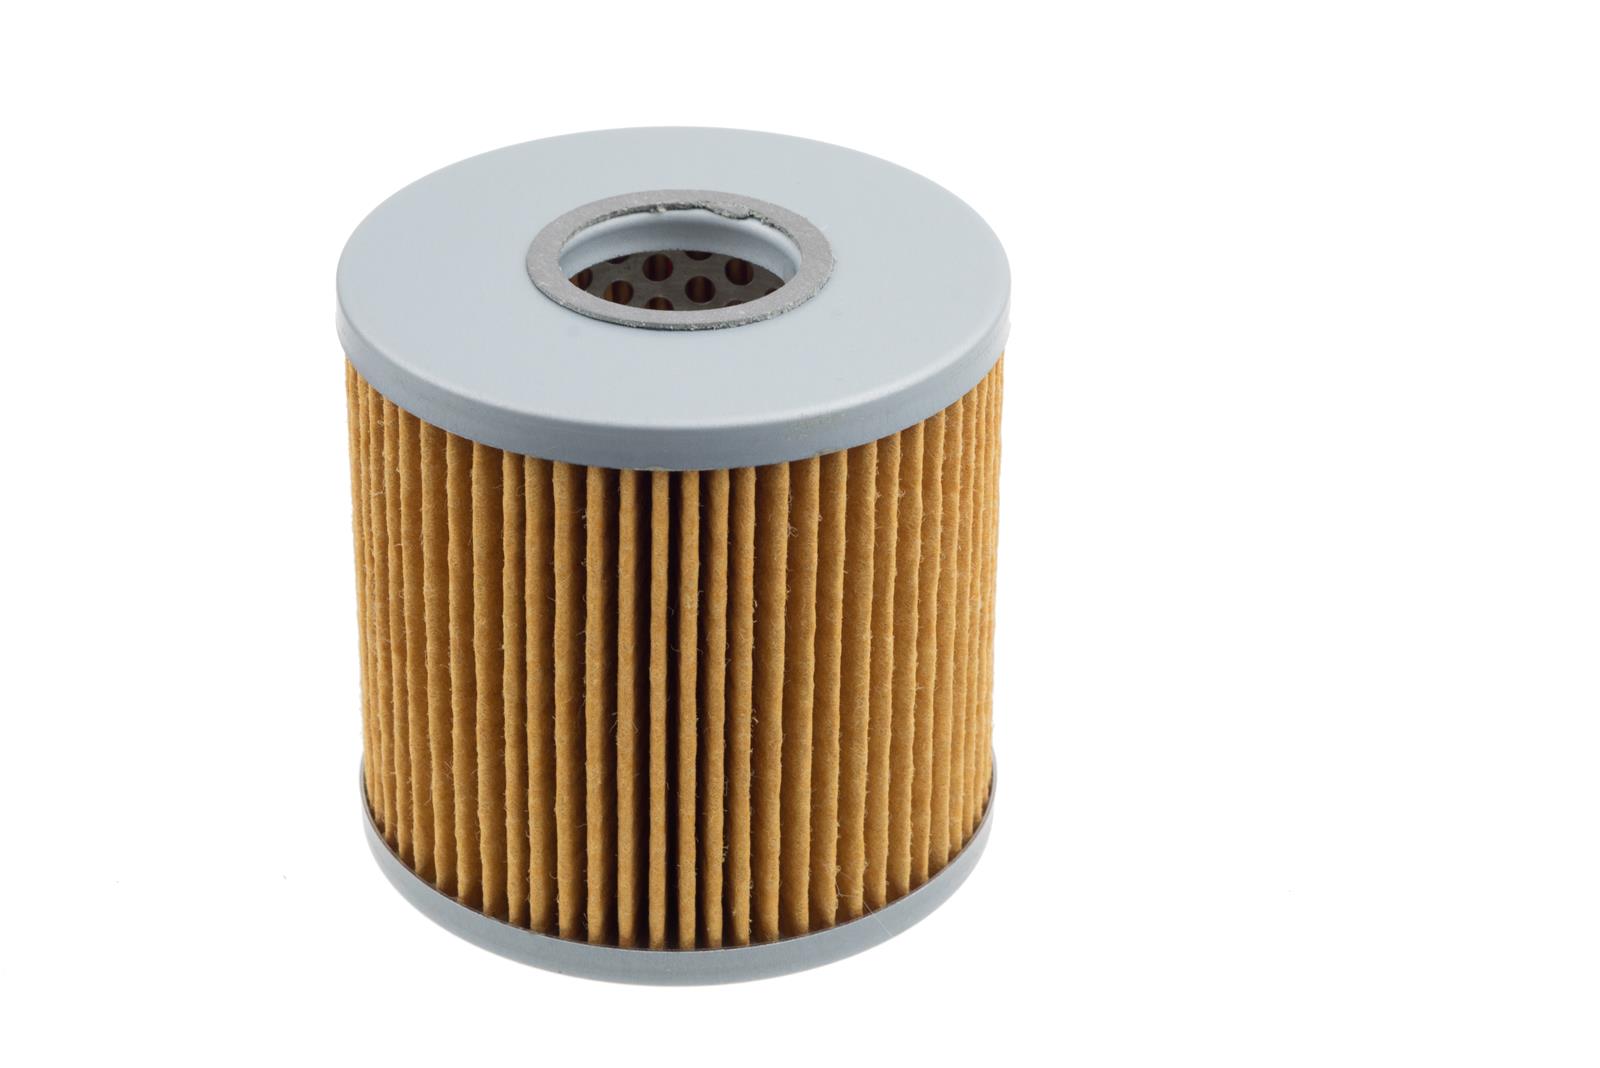 Redhorse Fuel Filter 10 micron paper fuel filter element and O-rings for